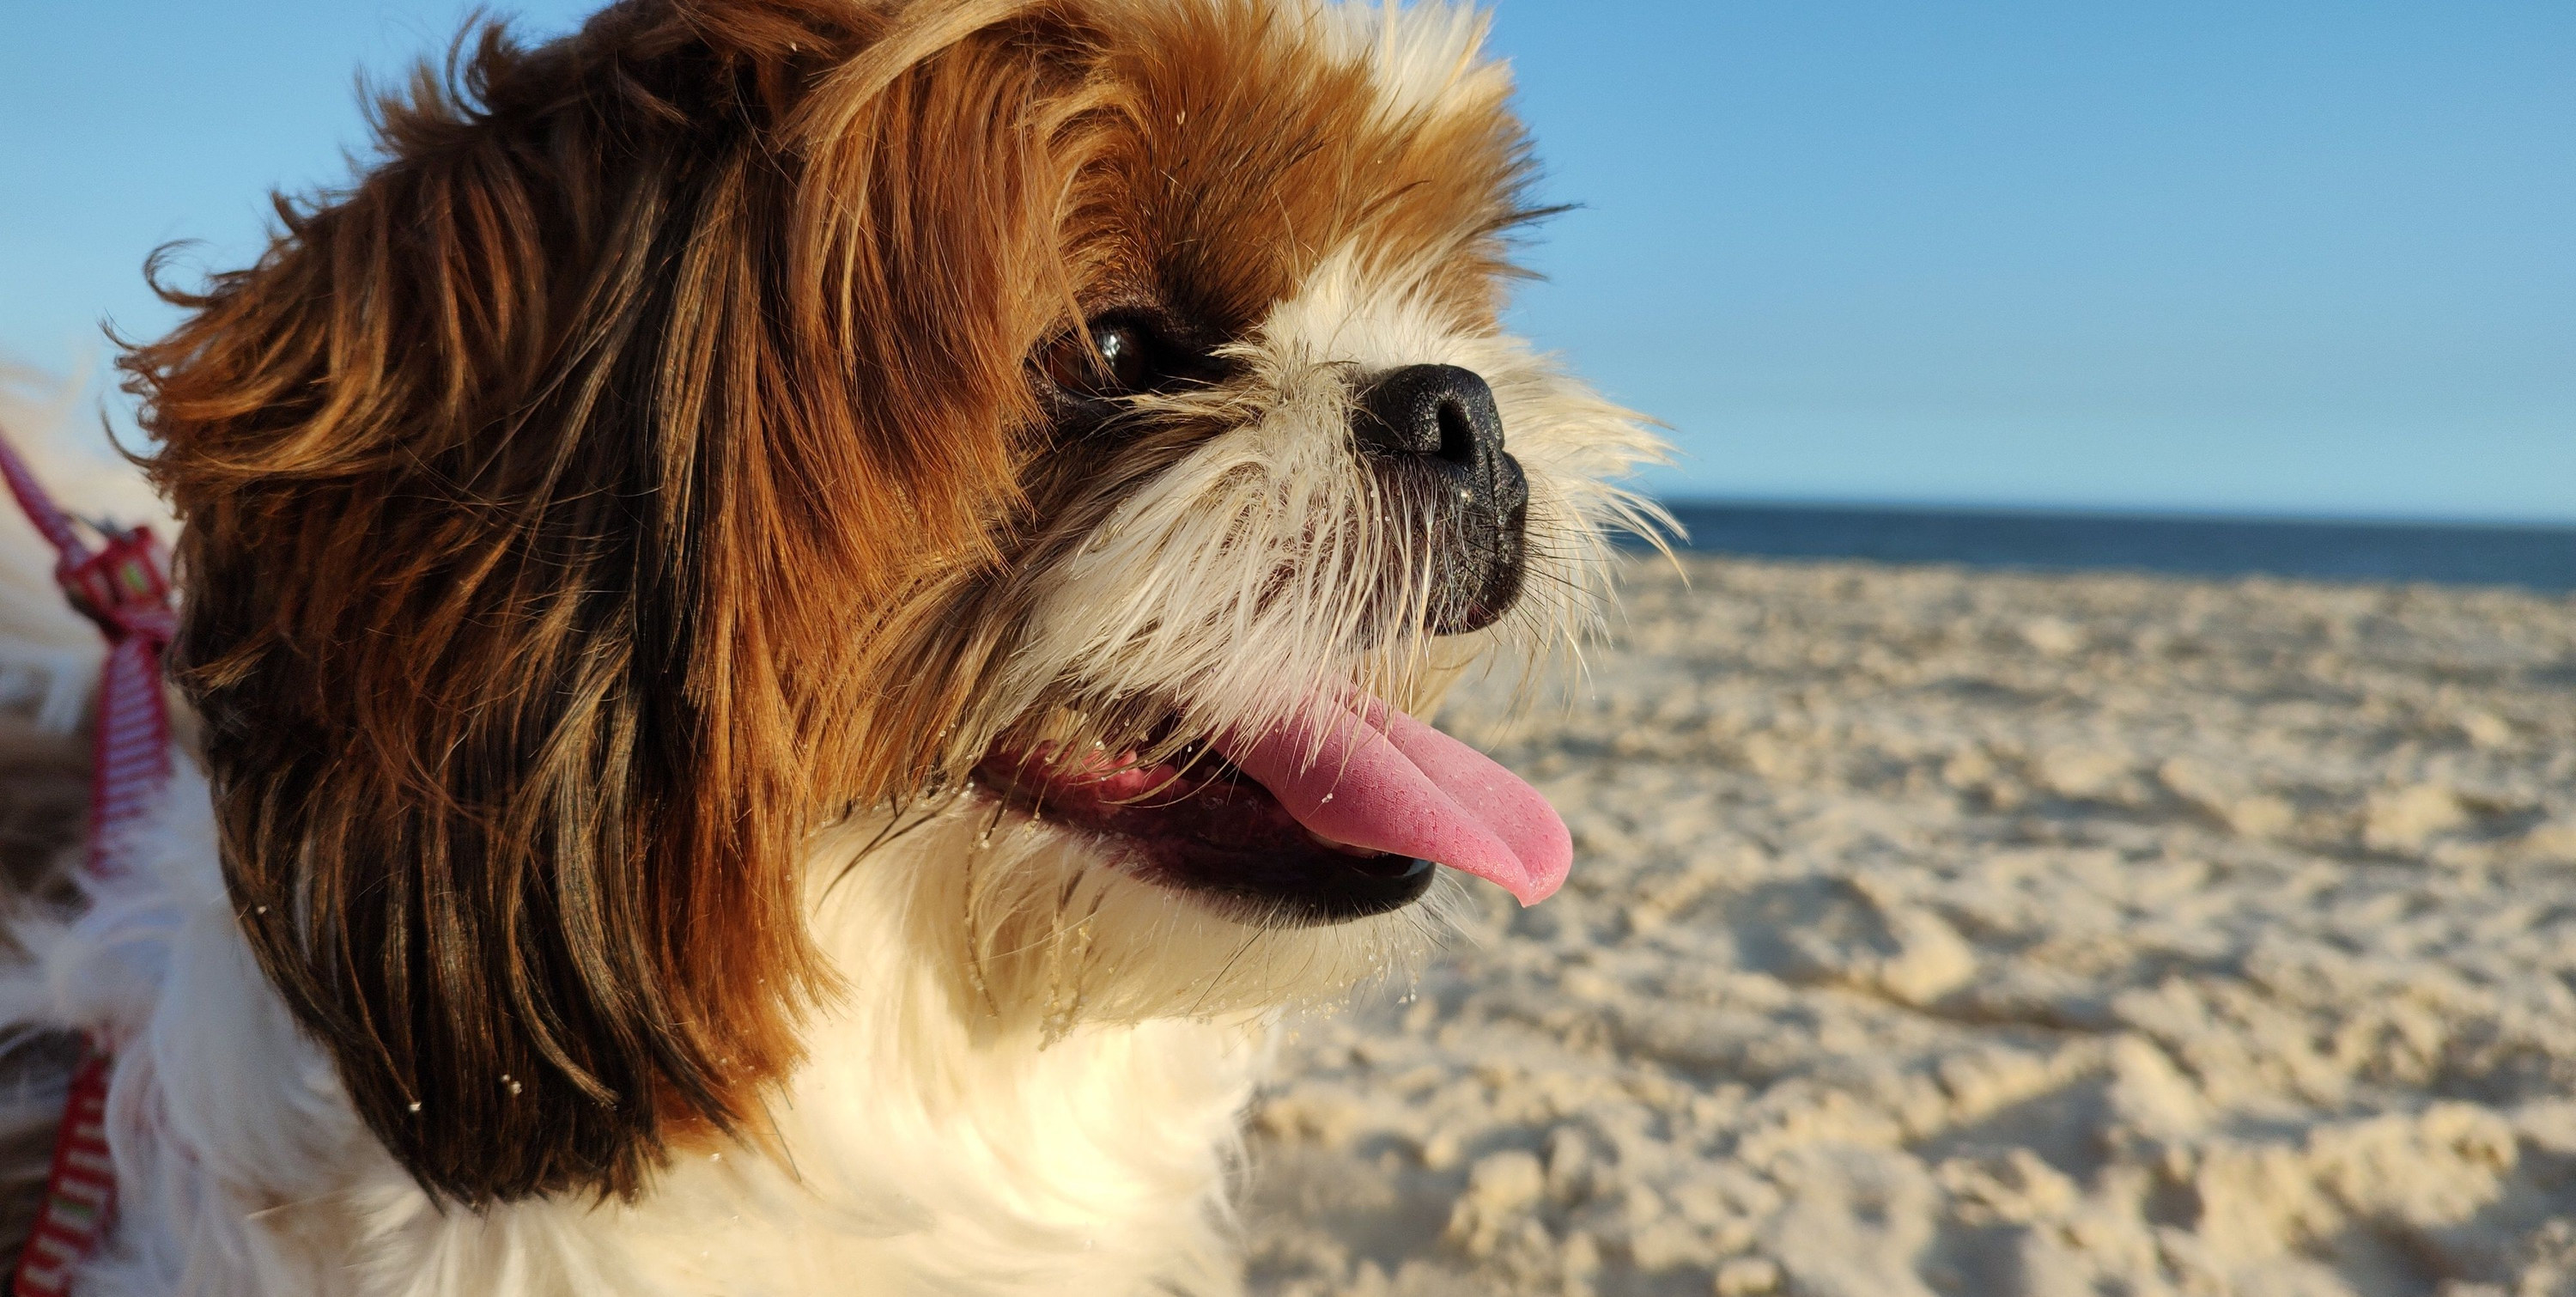 A Shih Tzu looking happy at the beach